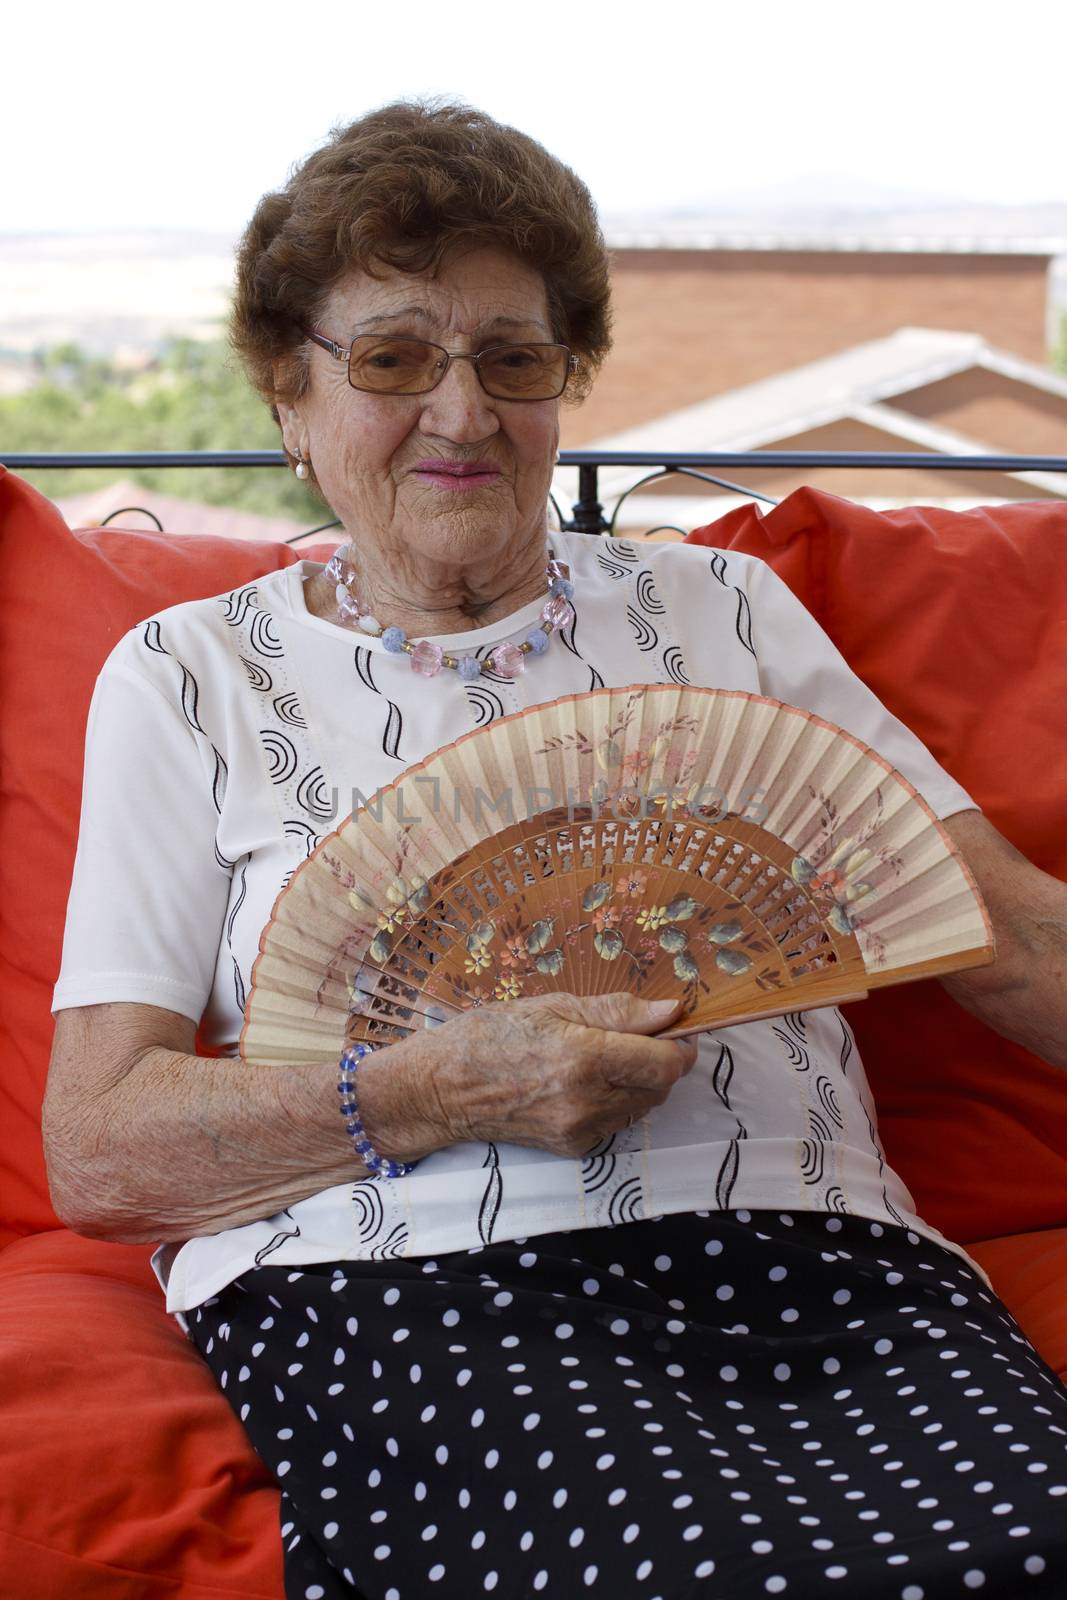 Old woman sitting in the patio in red cushion with a hand fan.